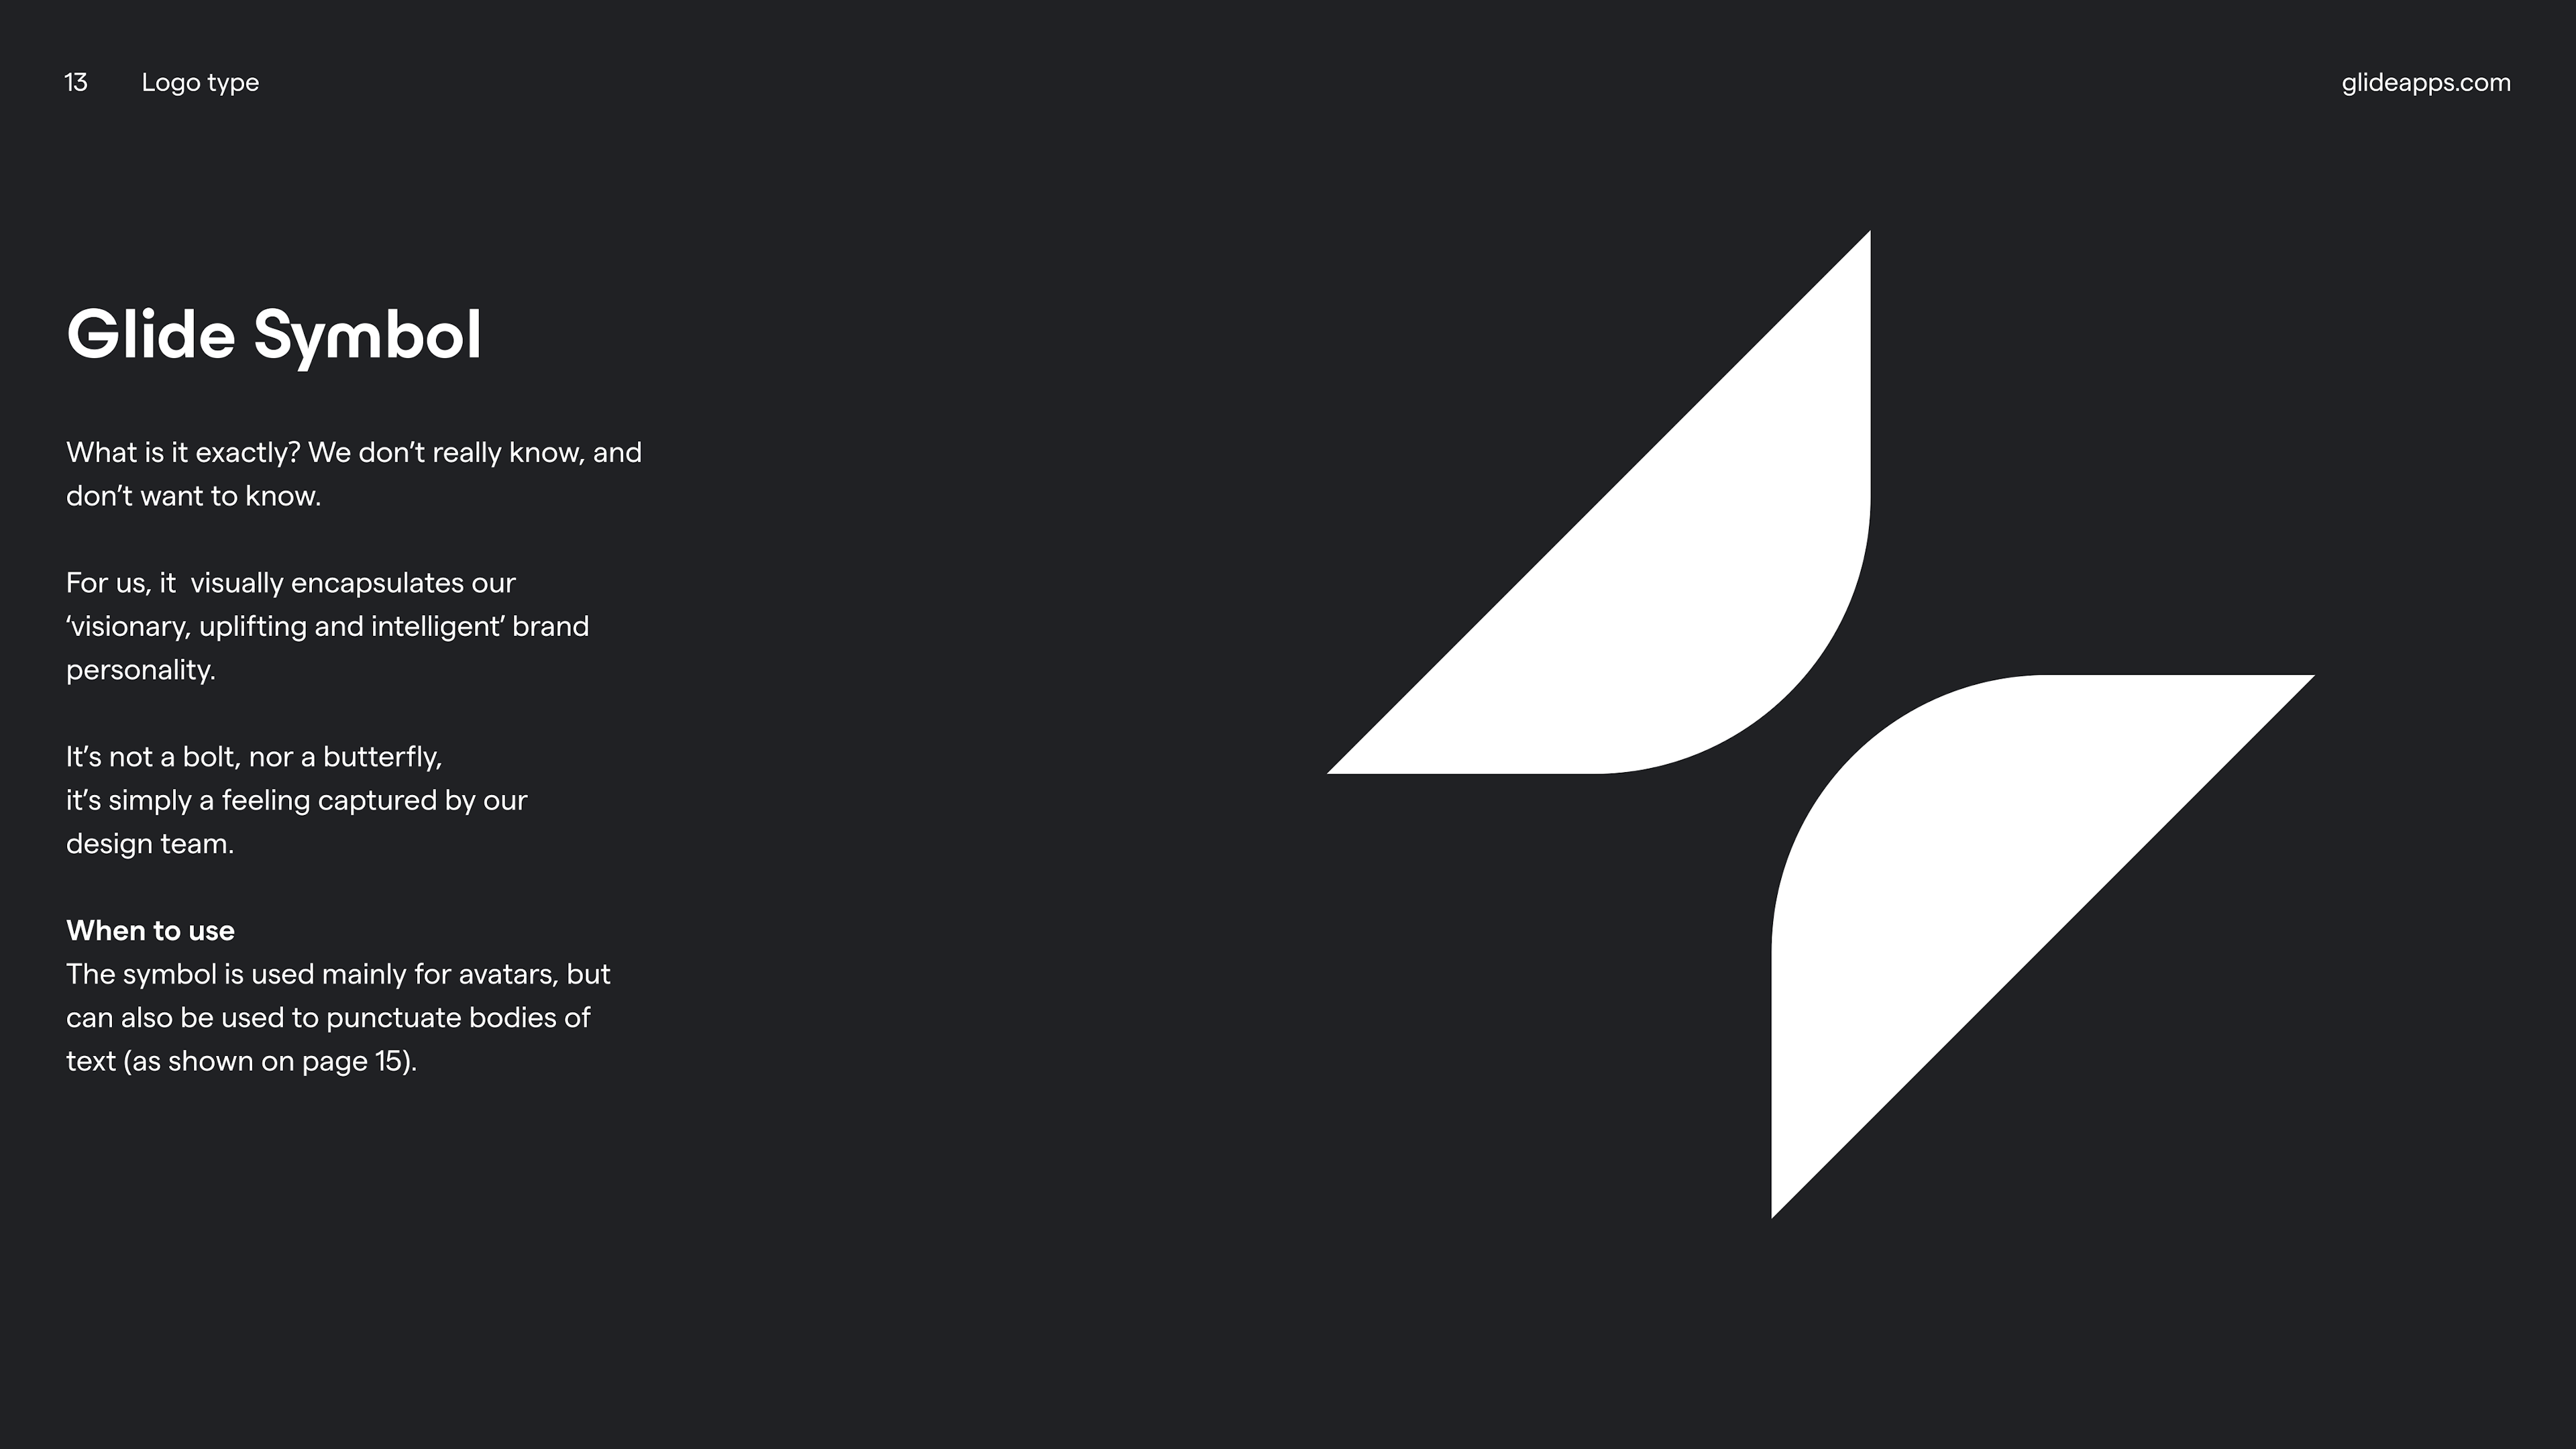 Glide brand guidelines